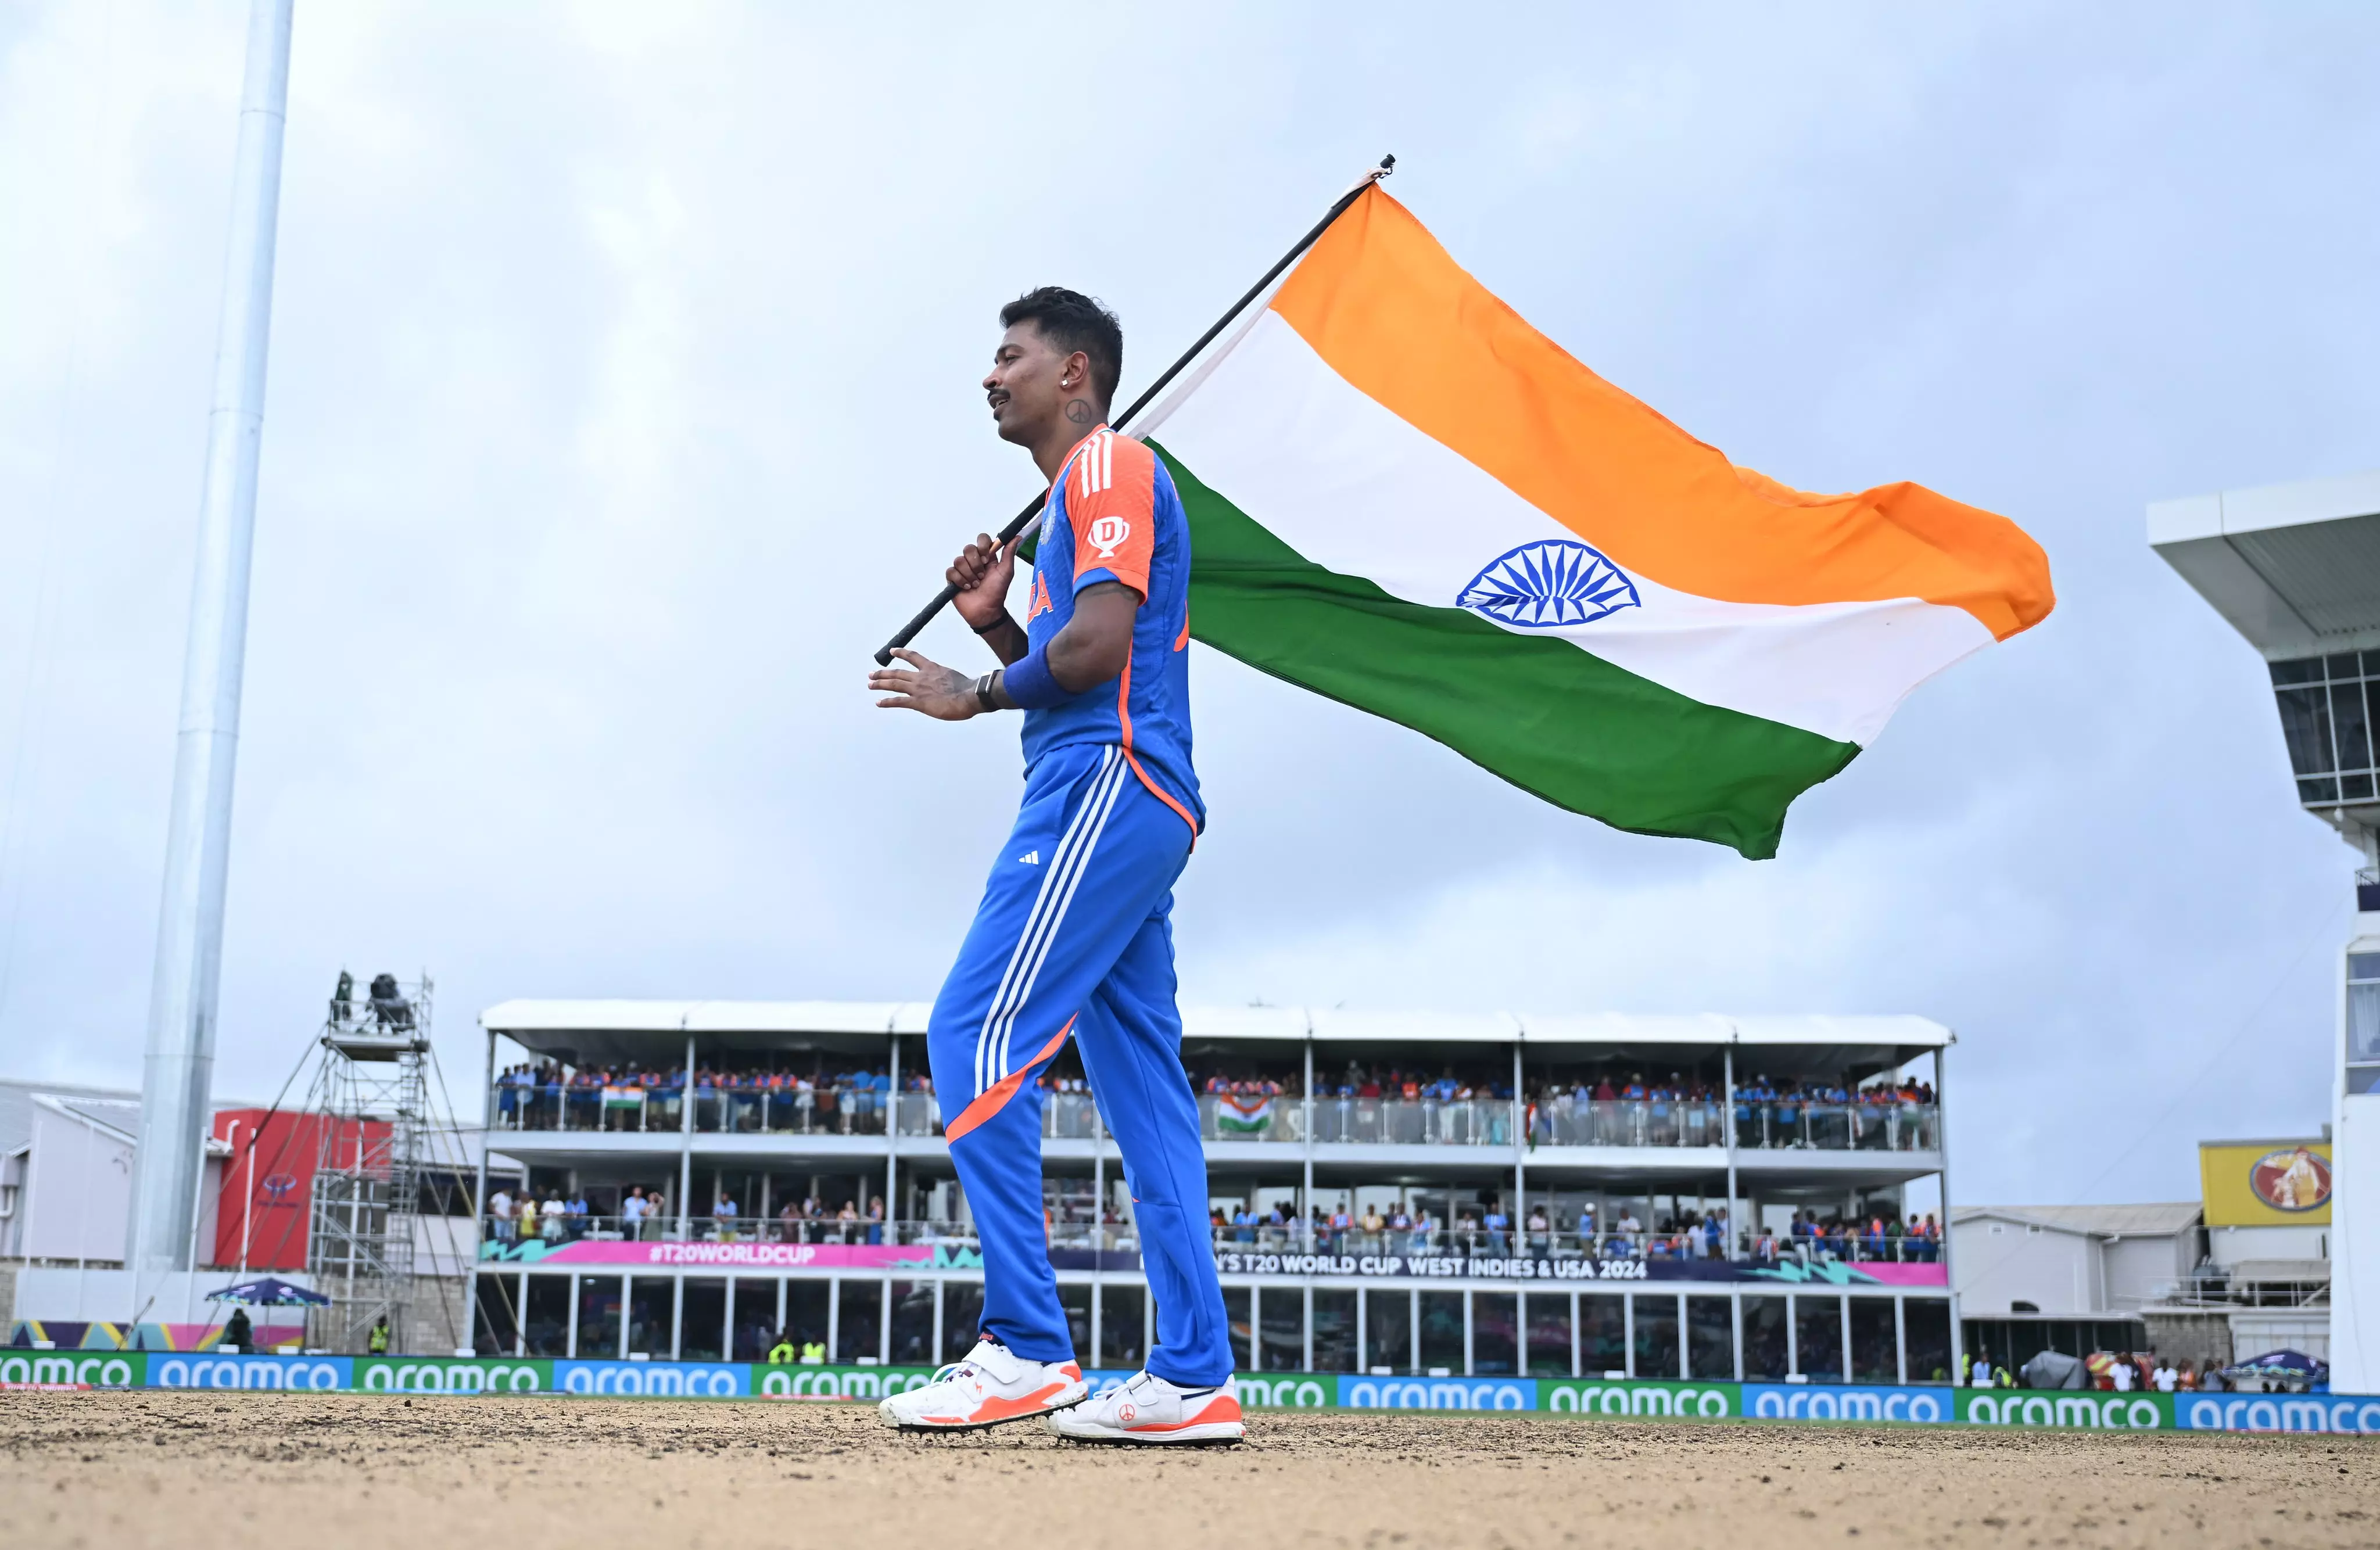 It is important to be graceful, whether you win or lose: Hardik Pandya